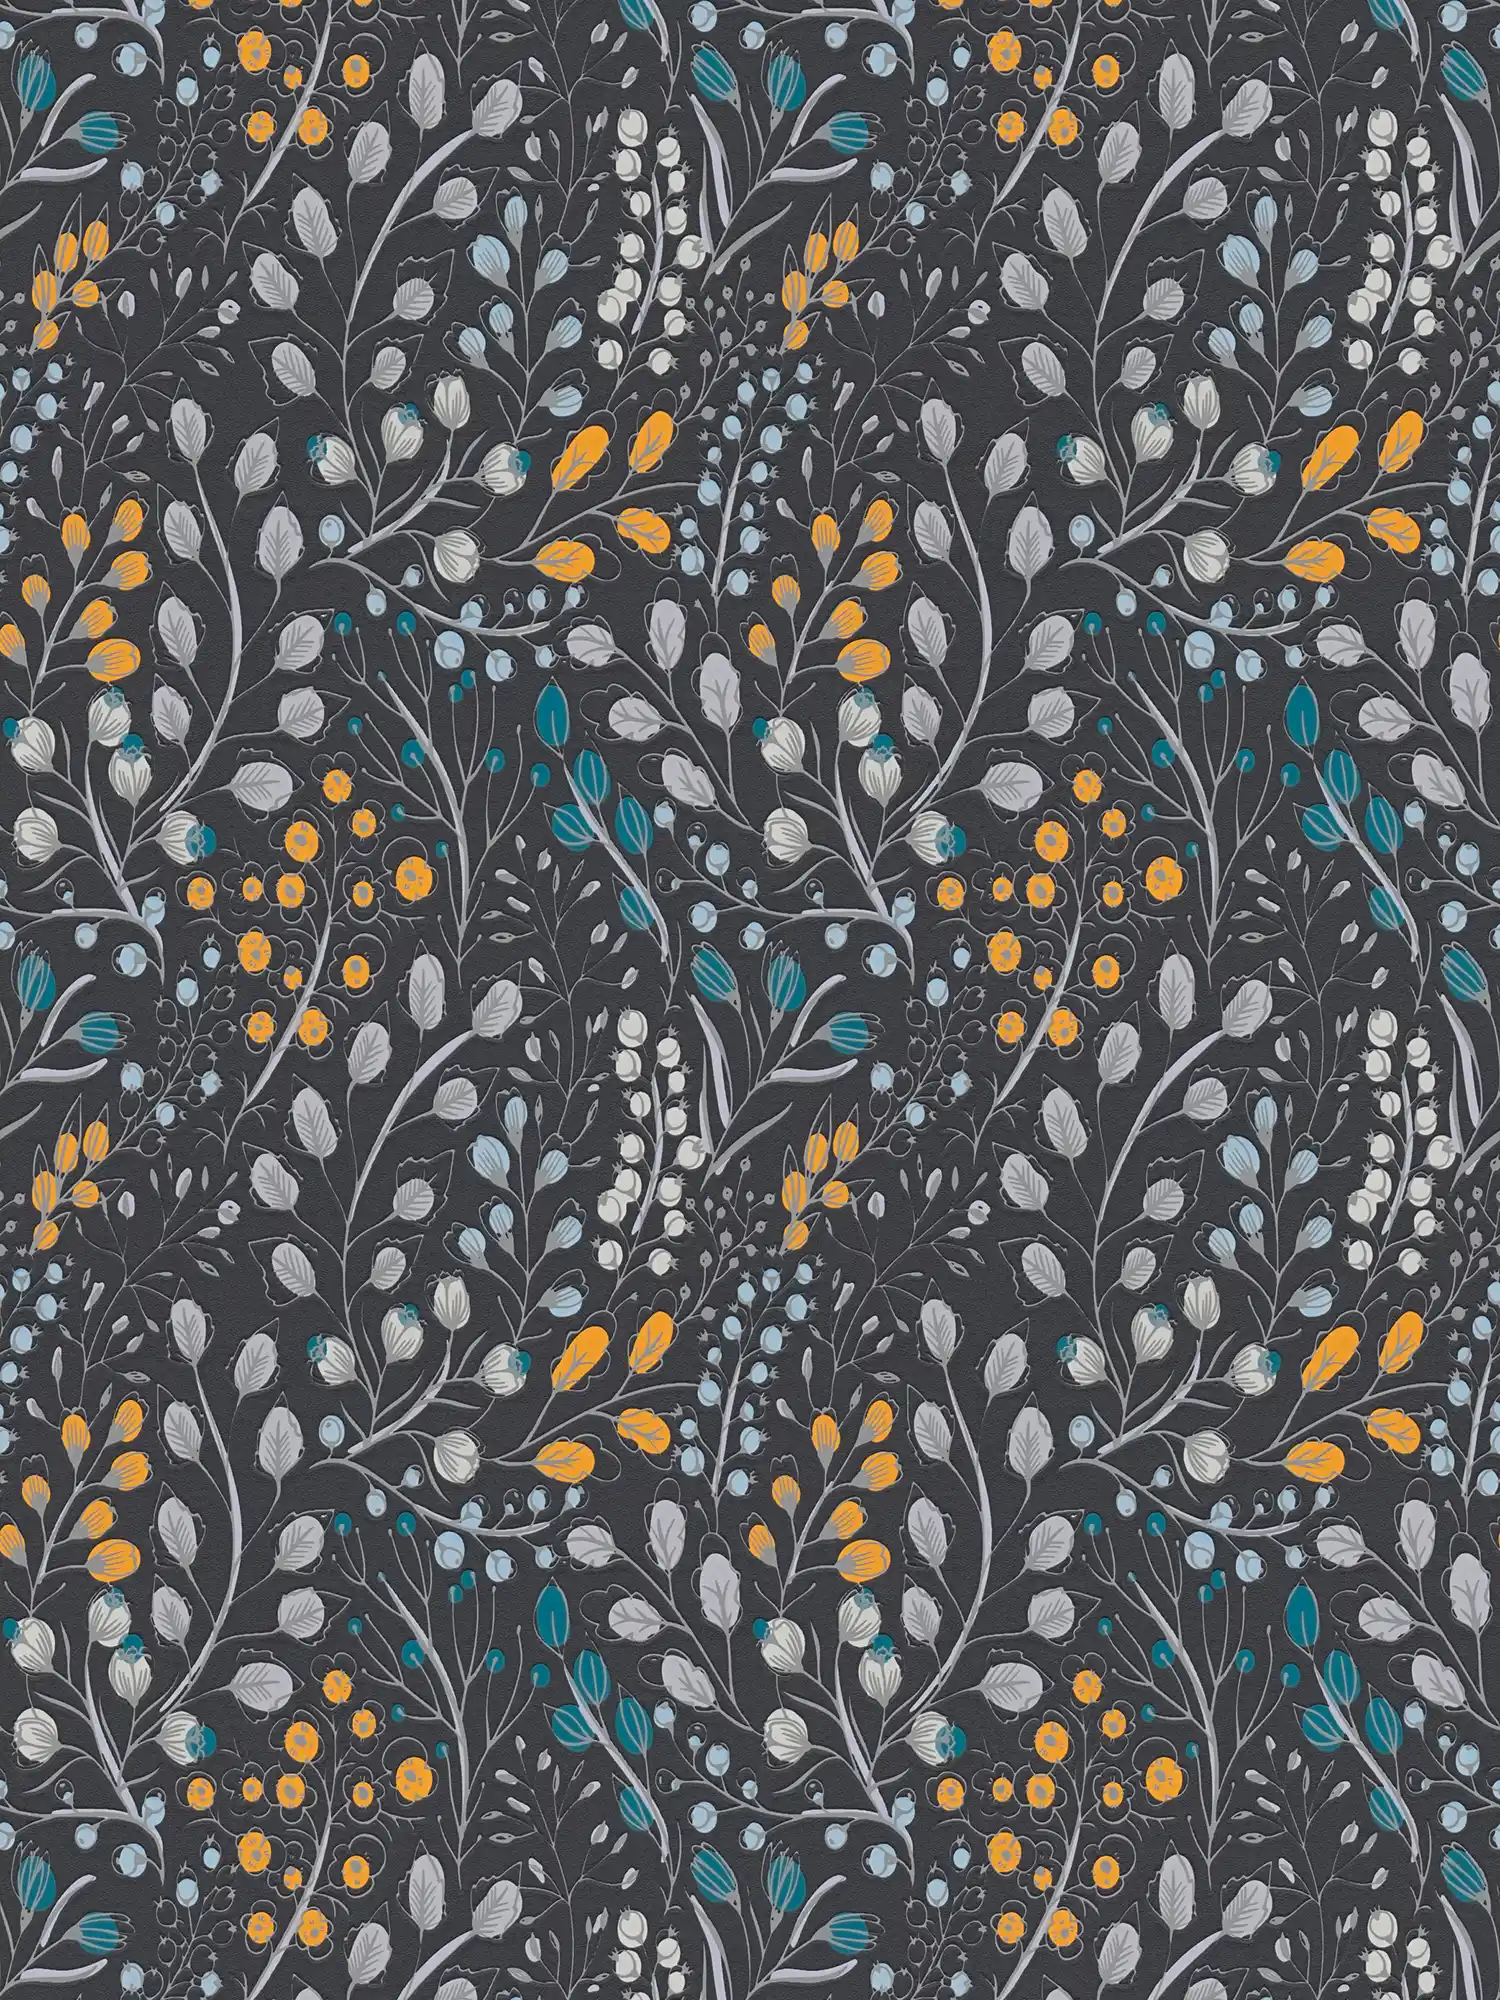 Wallpaper with floral & abstract pattern matt - black, yellow, blue
